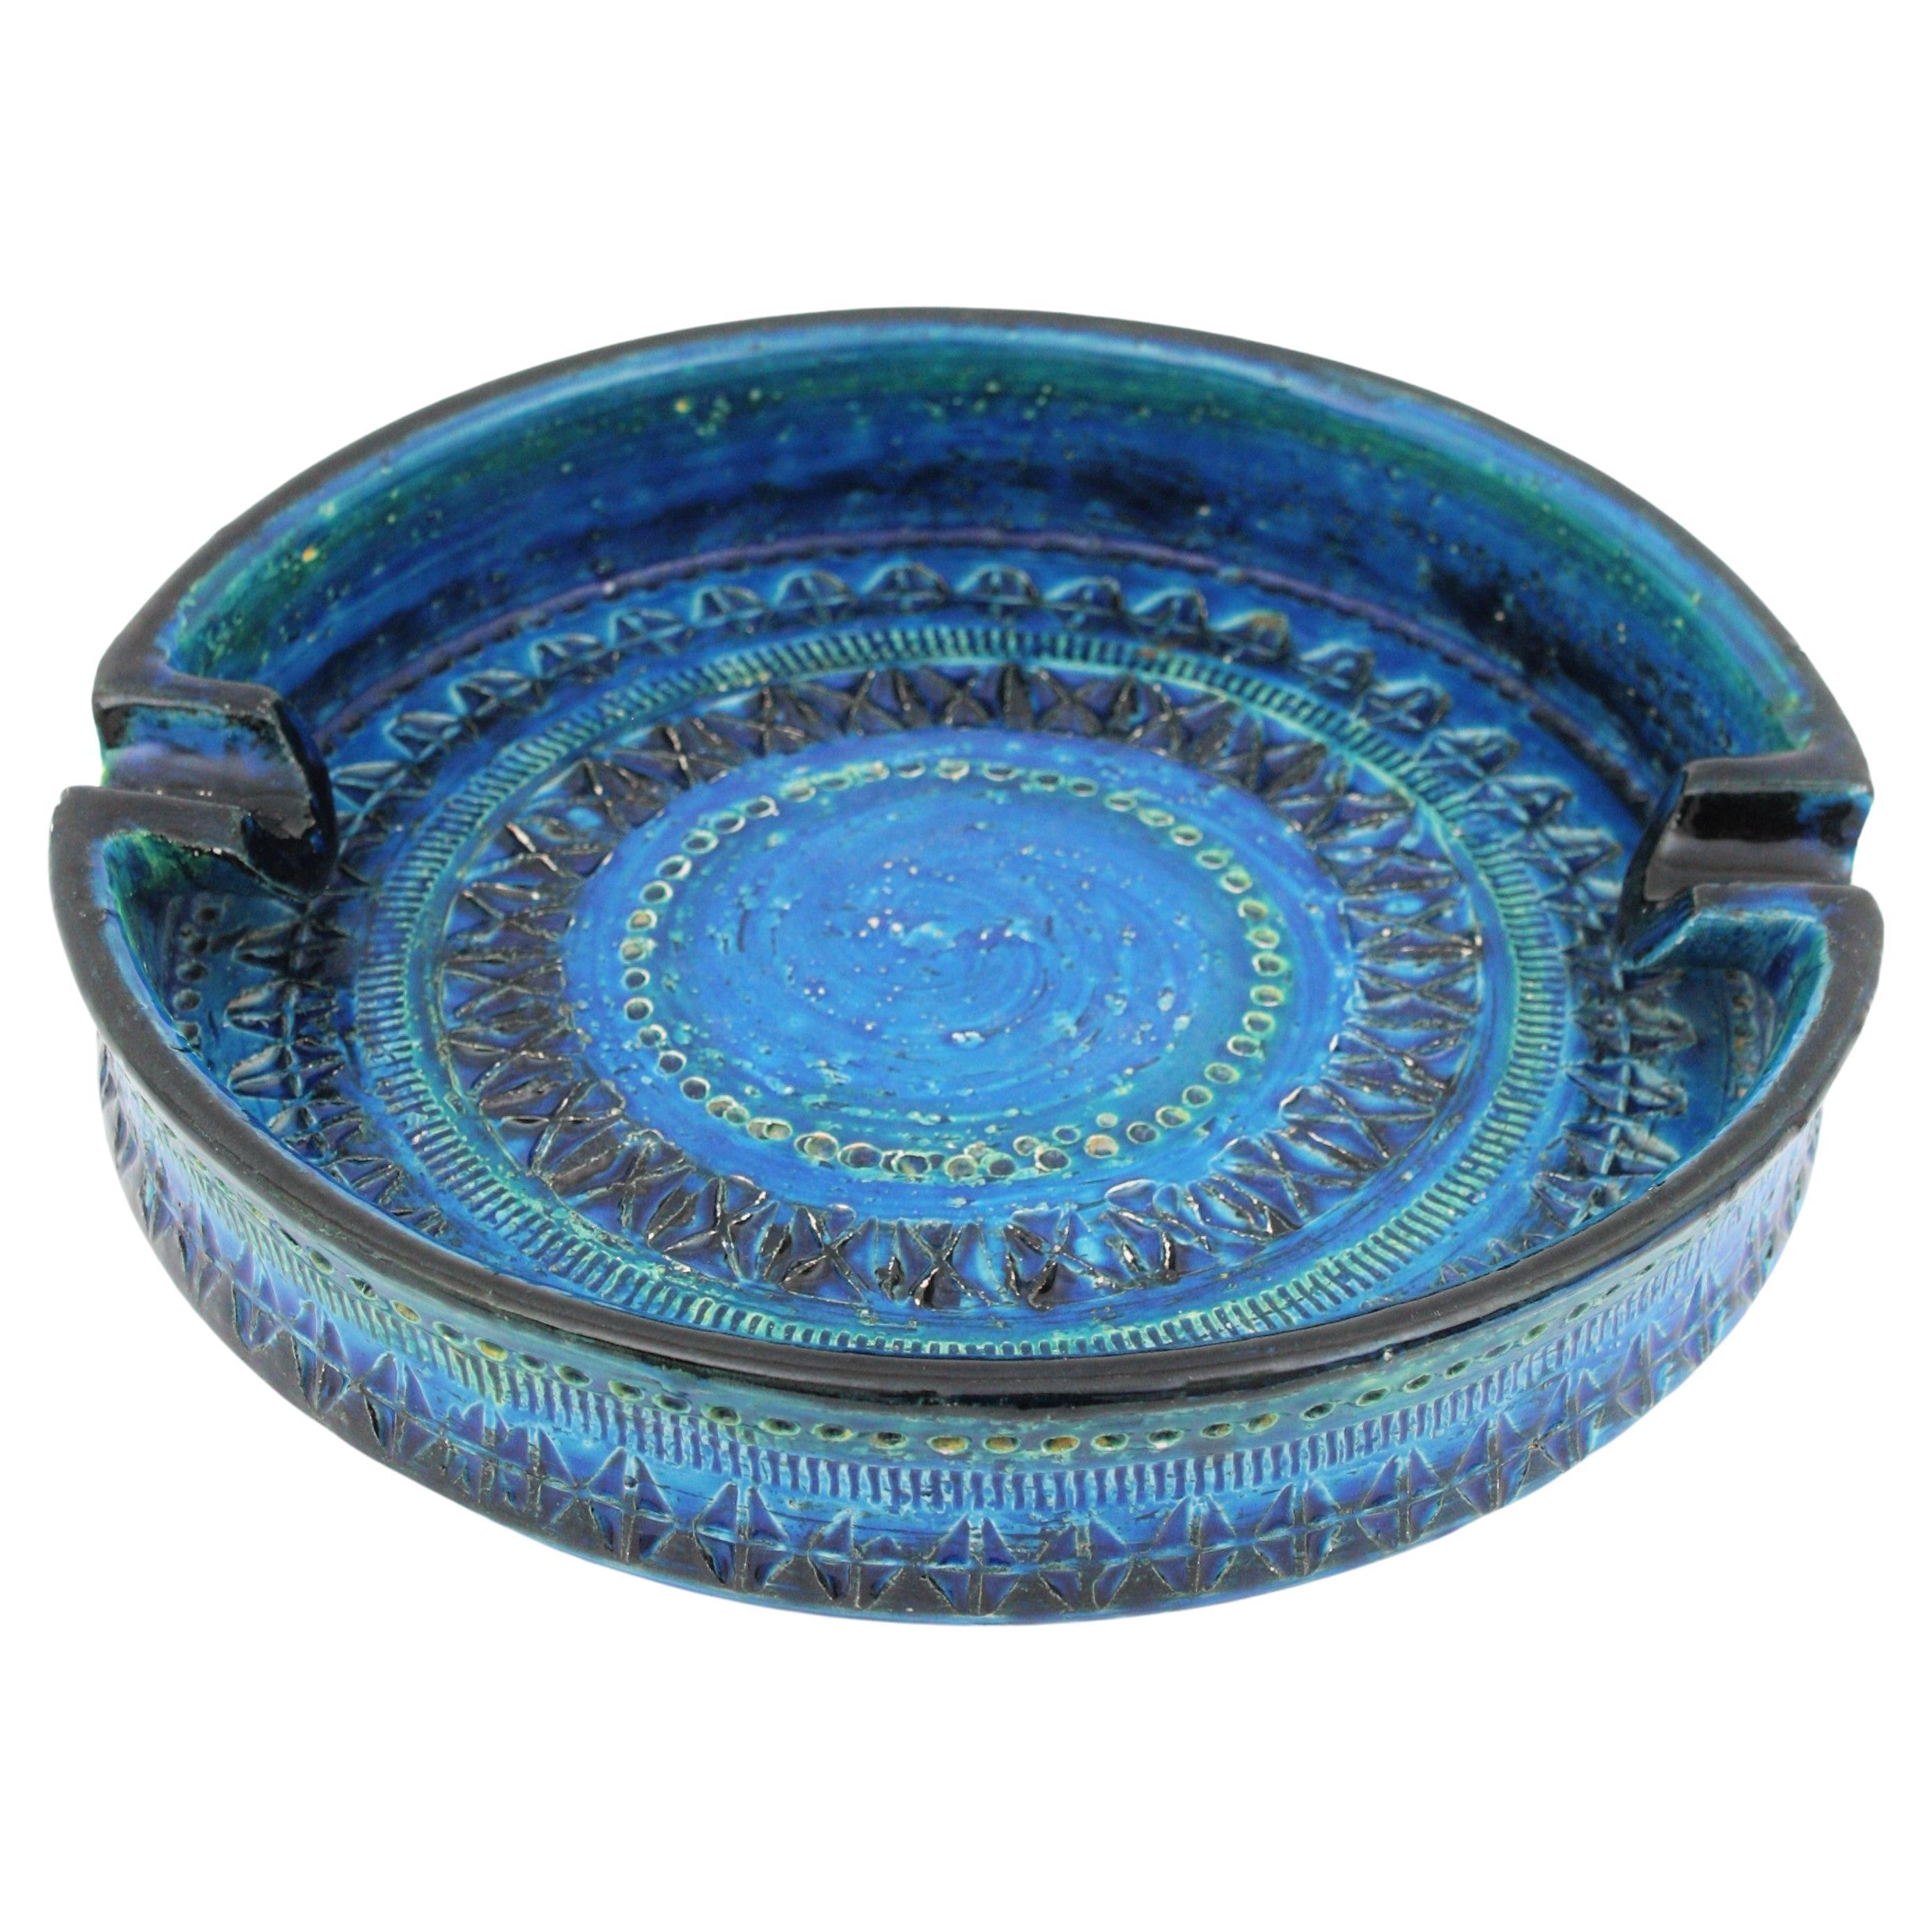 Blue glazed (Rimini Blu) ceramic large ashtray designed by Aldo Londi and manufactured by Bitossi.
Italy, 1950-1960s.
It was handcrafted in Italy with hand carved geometric design and in a glazed vibrant turquoise and cobalt blue. Its size allows